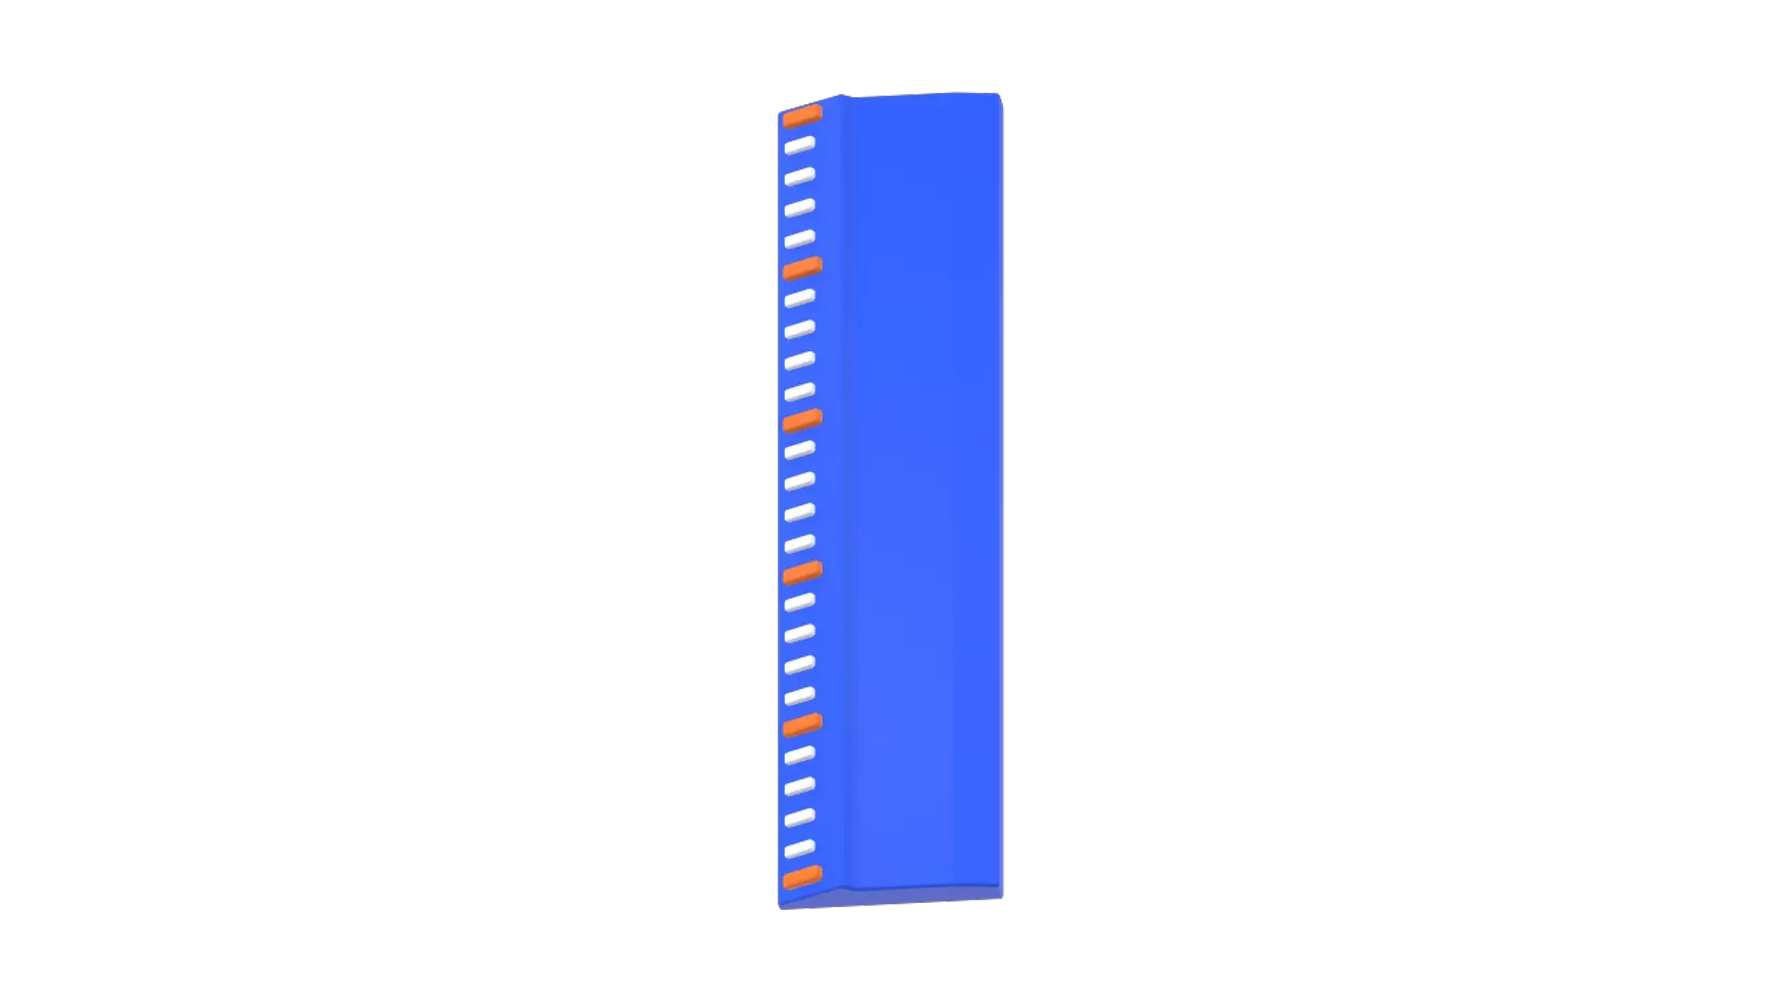 Ruler 3D Graphic